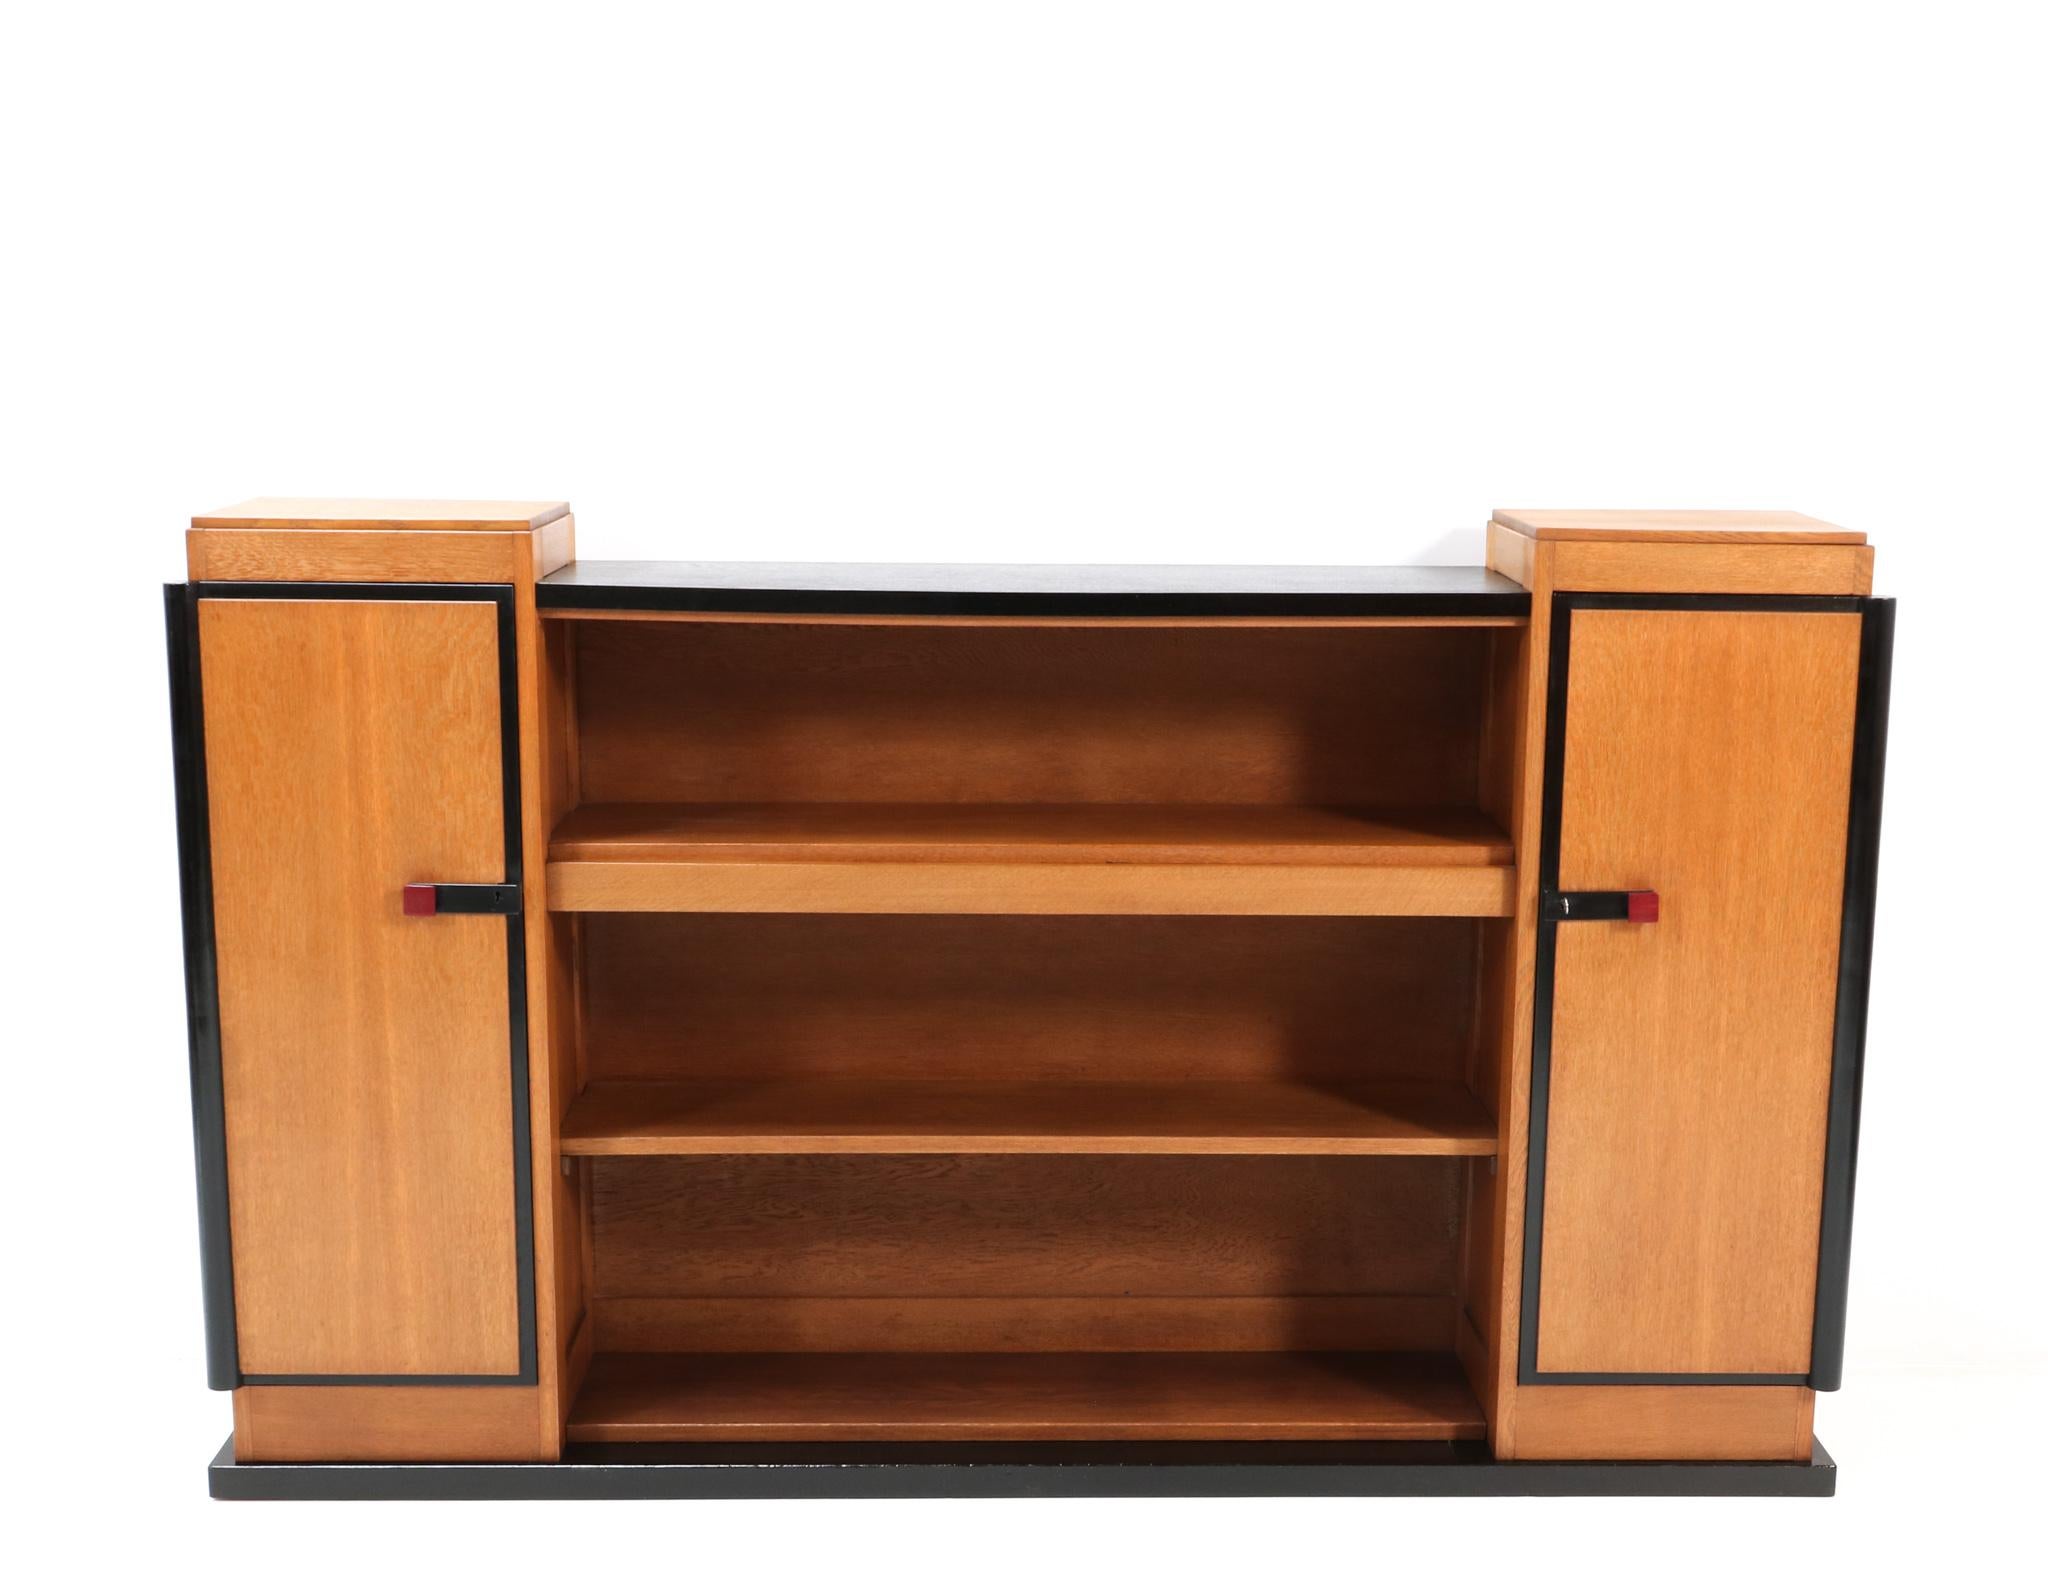 Magnificent and ultra rare Art Deco Modernist bookcase or credenza.
Design by Jan Brunott.
Striking Dutch design from the 1920s.
Solid oak with original black lacquered lining.
Eight original solid oak shelves.
We will ship this lovely piece of